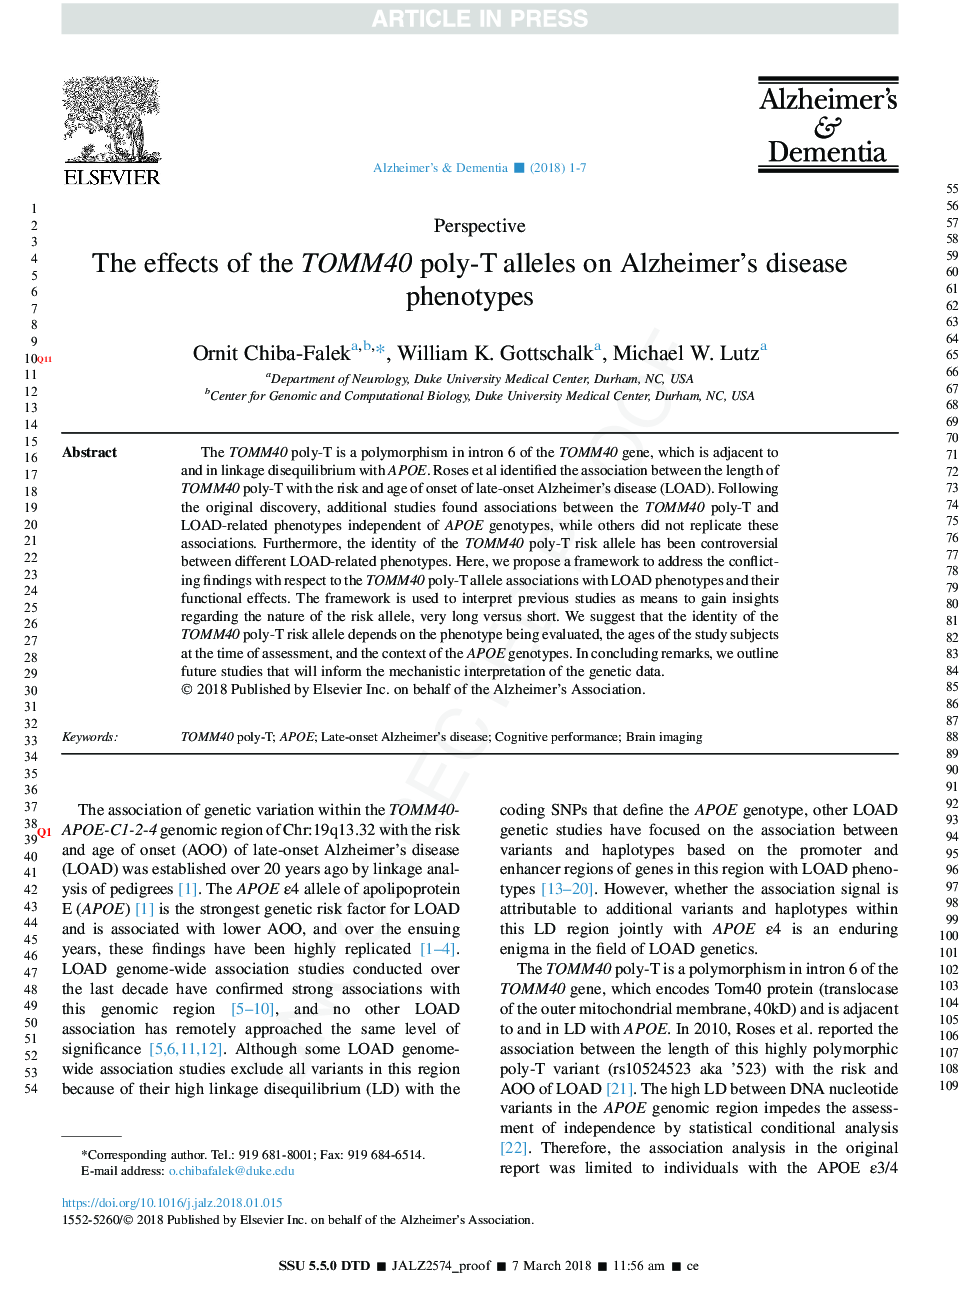 The effects of the TOMM40 poly-T alleles on Alzheimer's disease phenotypes